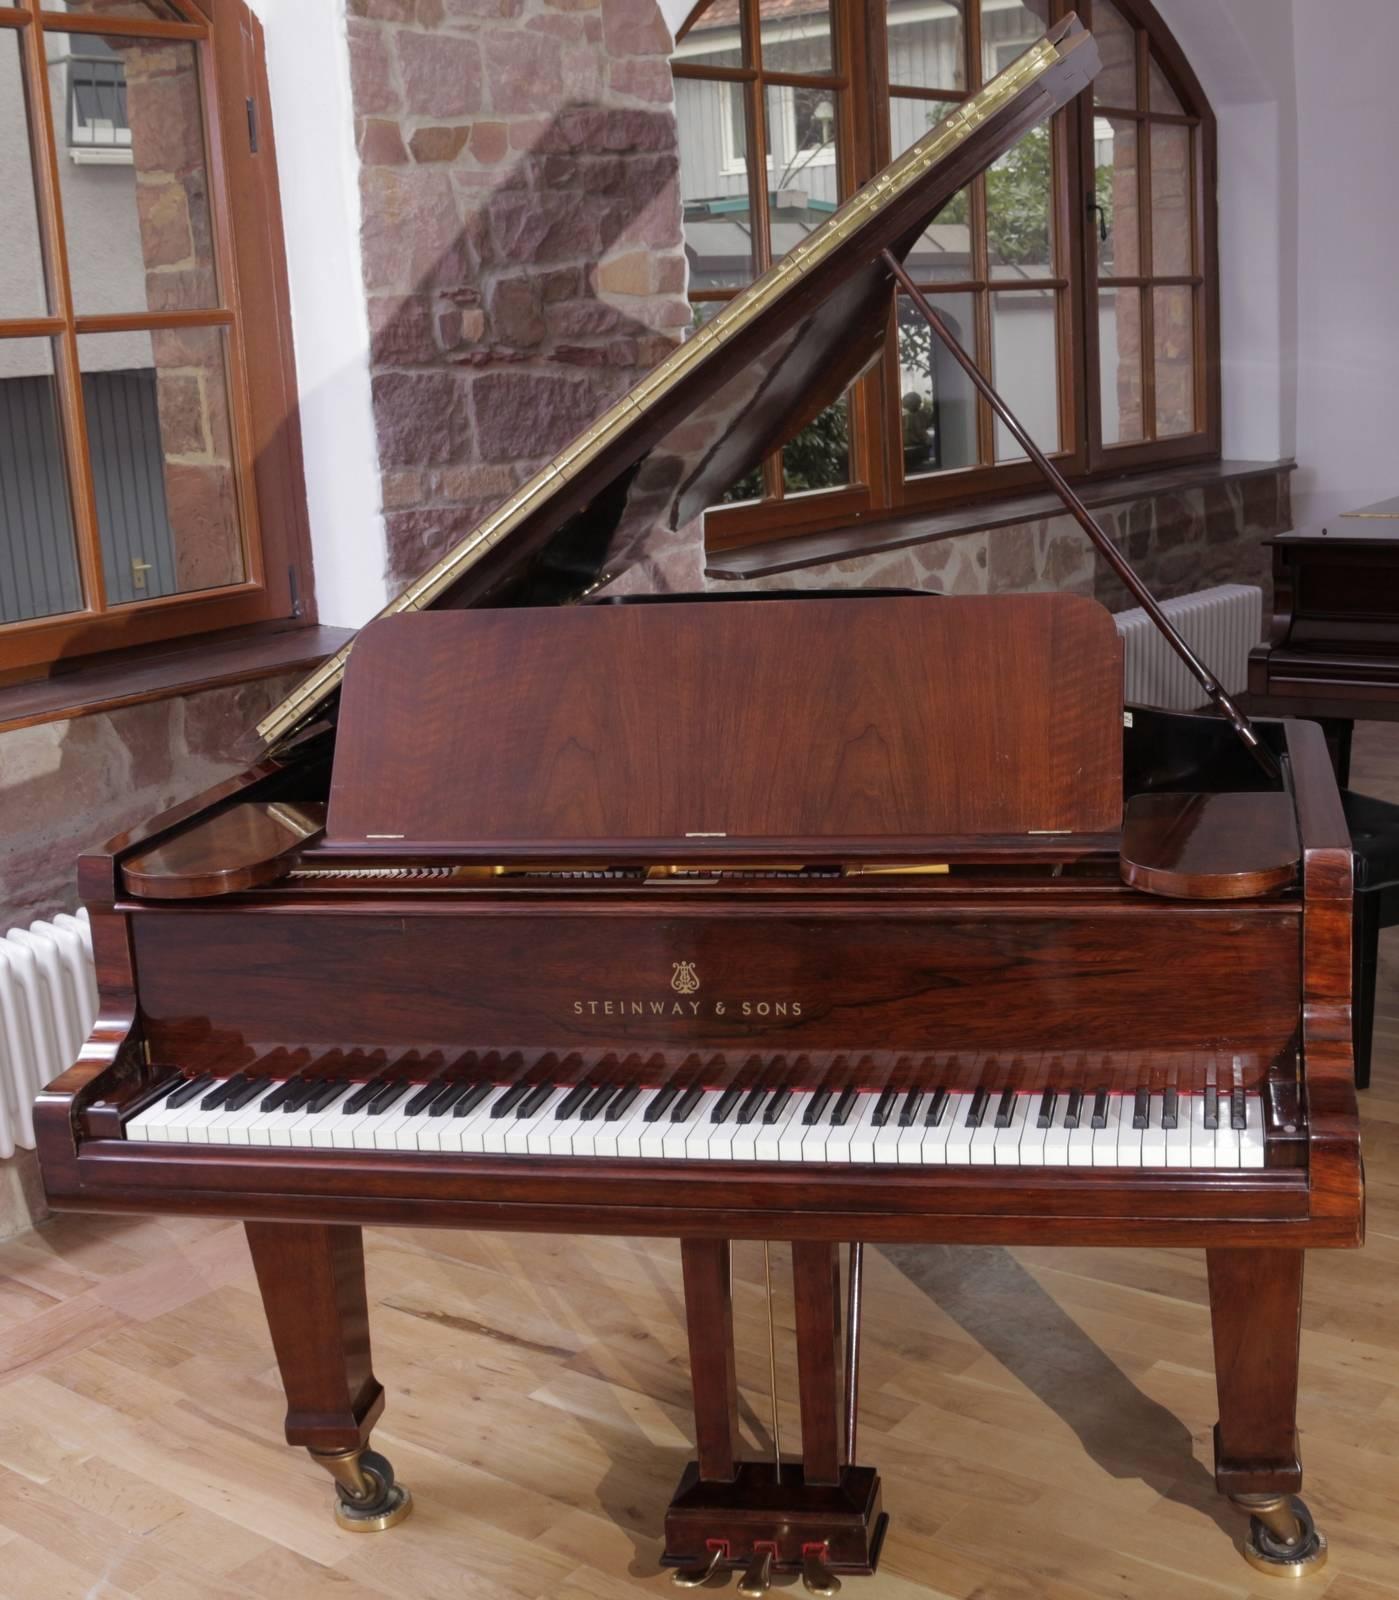 Steinway & Sons grand piano model C/ Style II, 85 keys, natural key covers.
Manufactured in New York 1880, case in glossy French polished rosewood. 
The instrument is fully rebuilt by a German piano technician.The action has been carefully